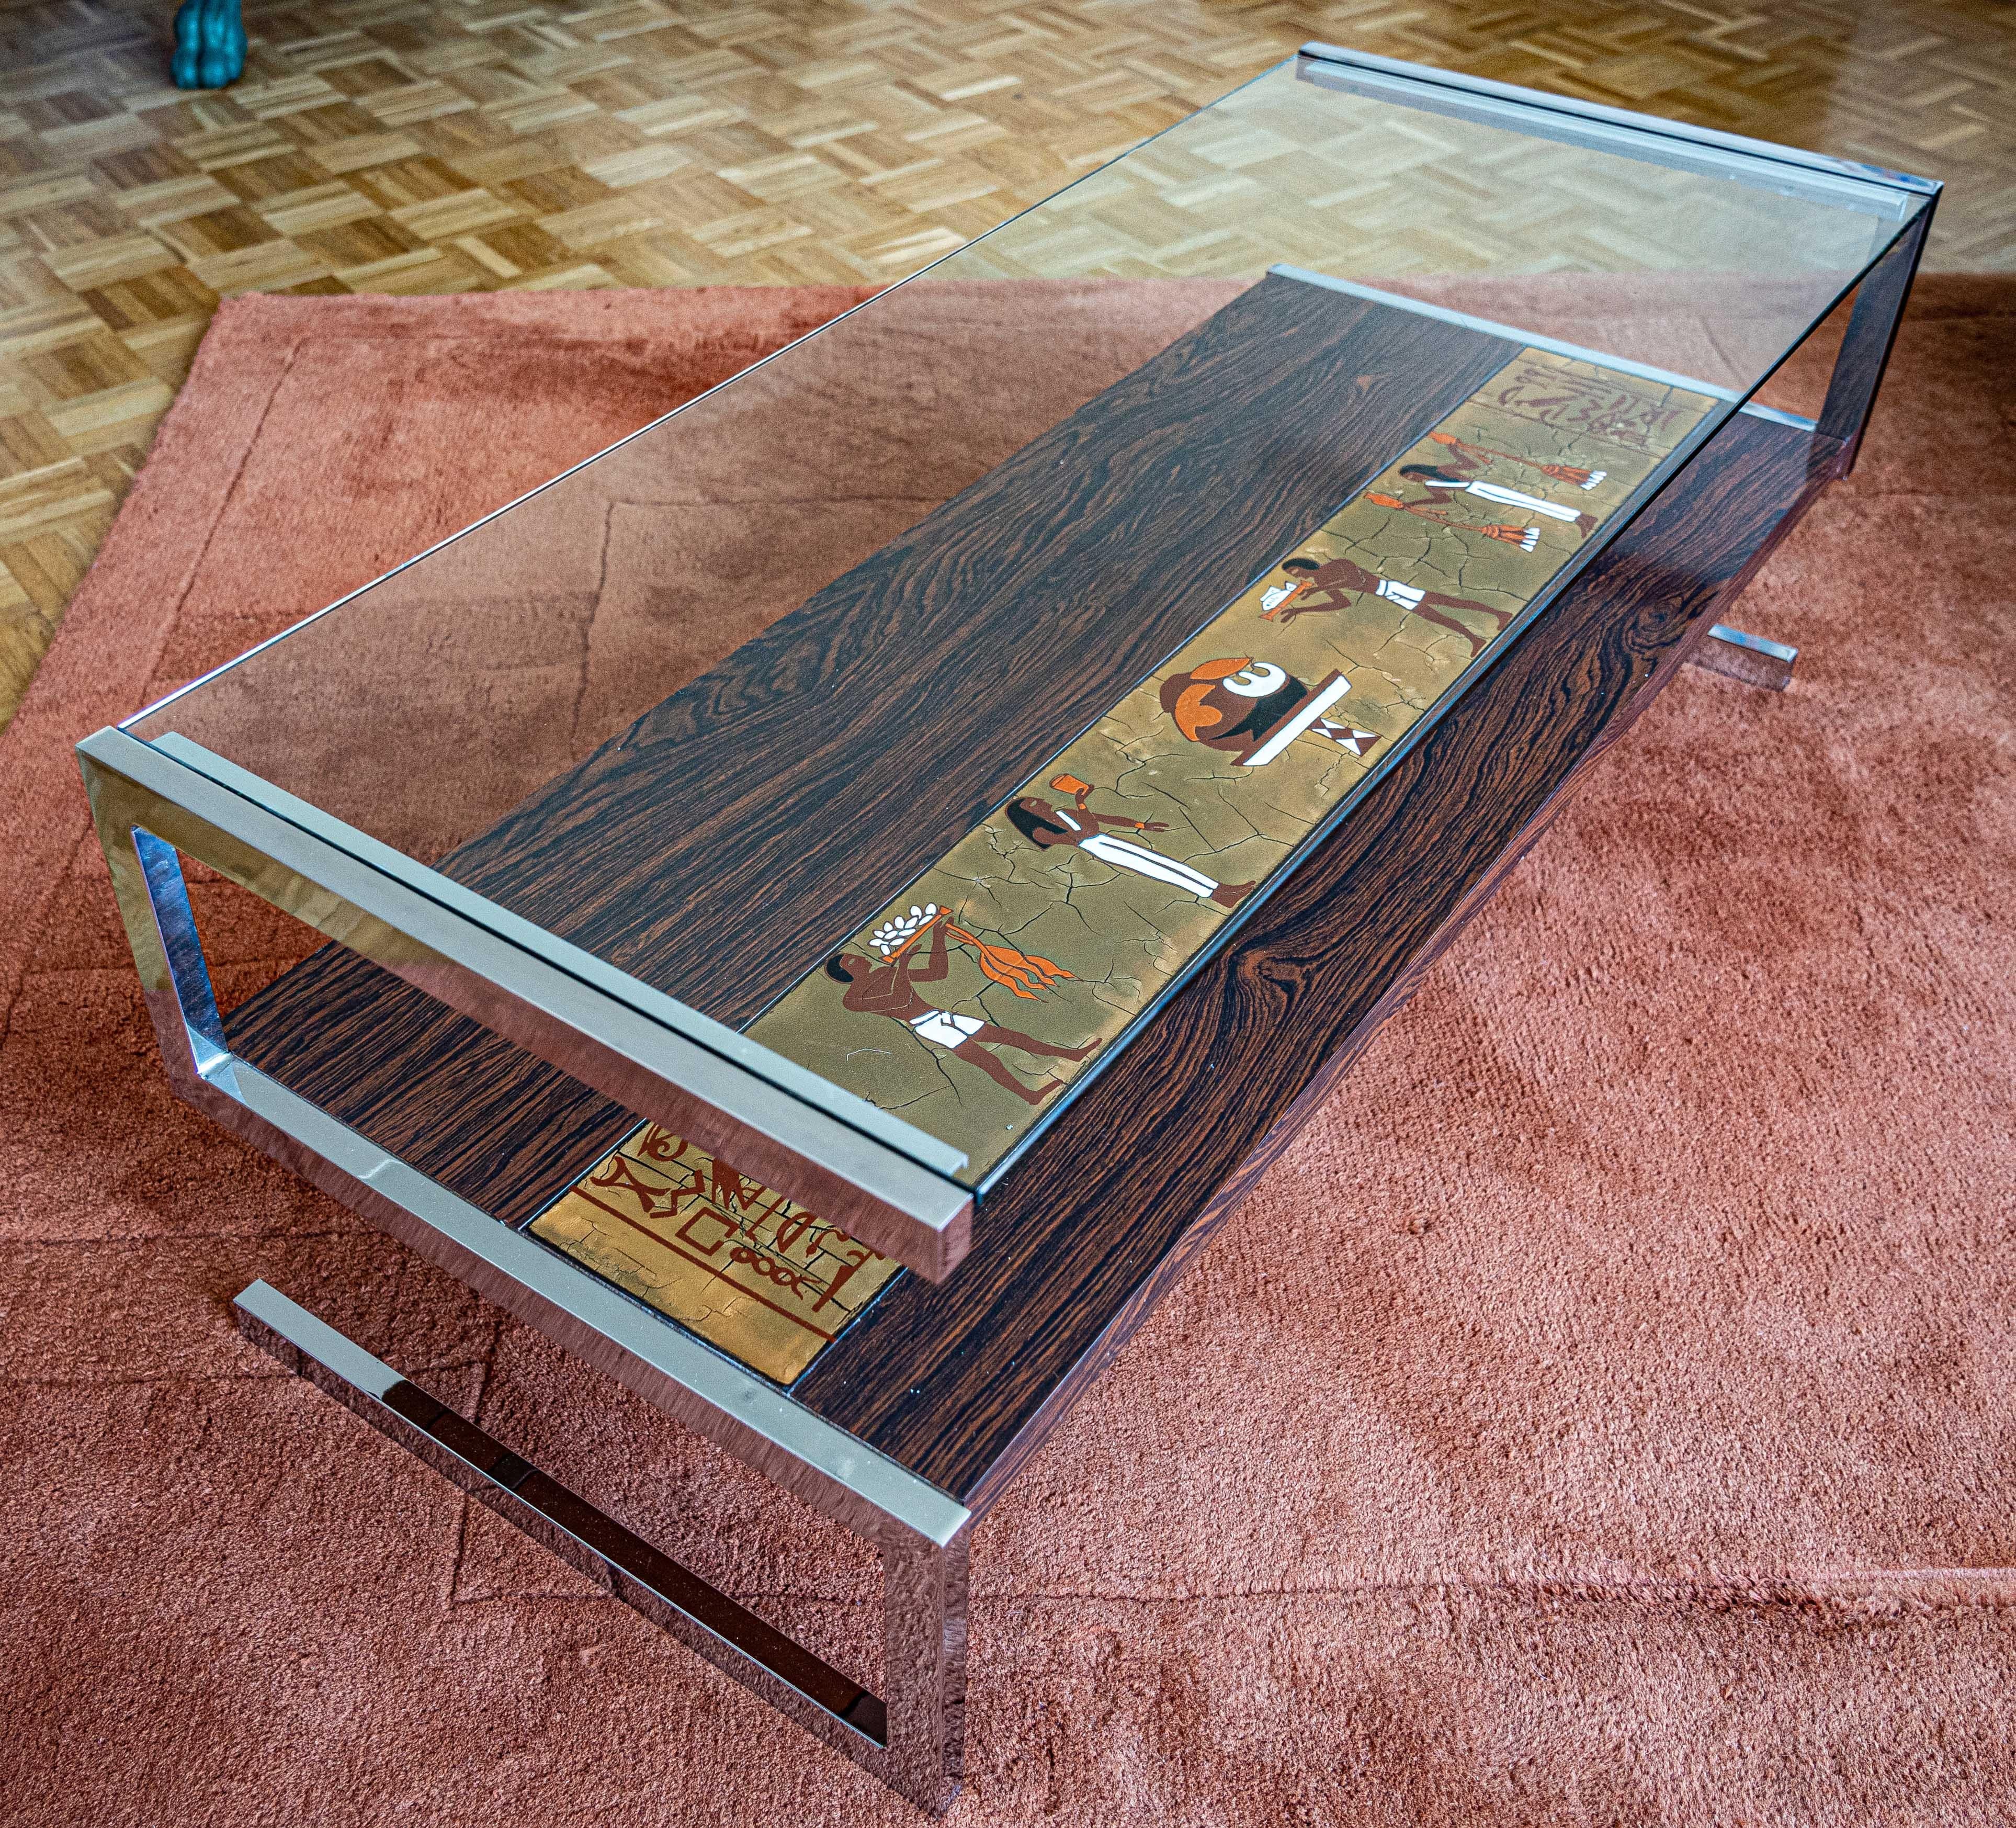 Midcentury coffee table in glass, steel and tiles with Egyptian motifs.
Refined pieces mixing cleverly a modern and contemporary design for the structure and archaïque references with the theme of the tiles which makes this piece one of a kind.